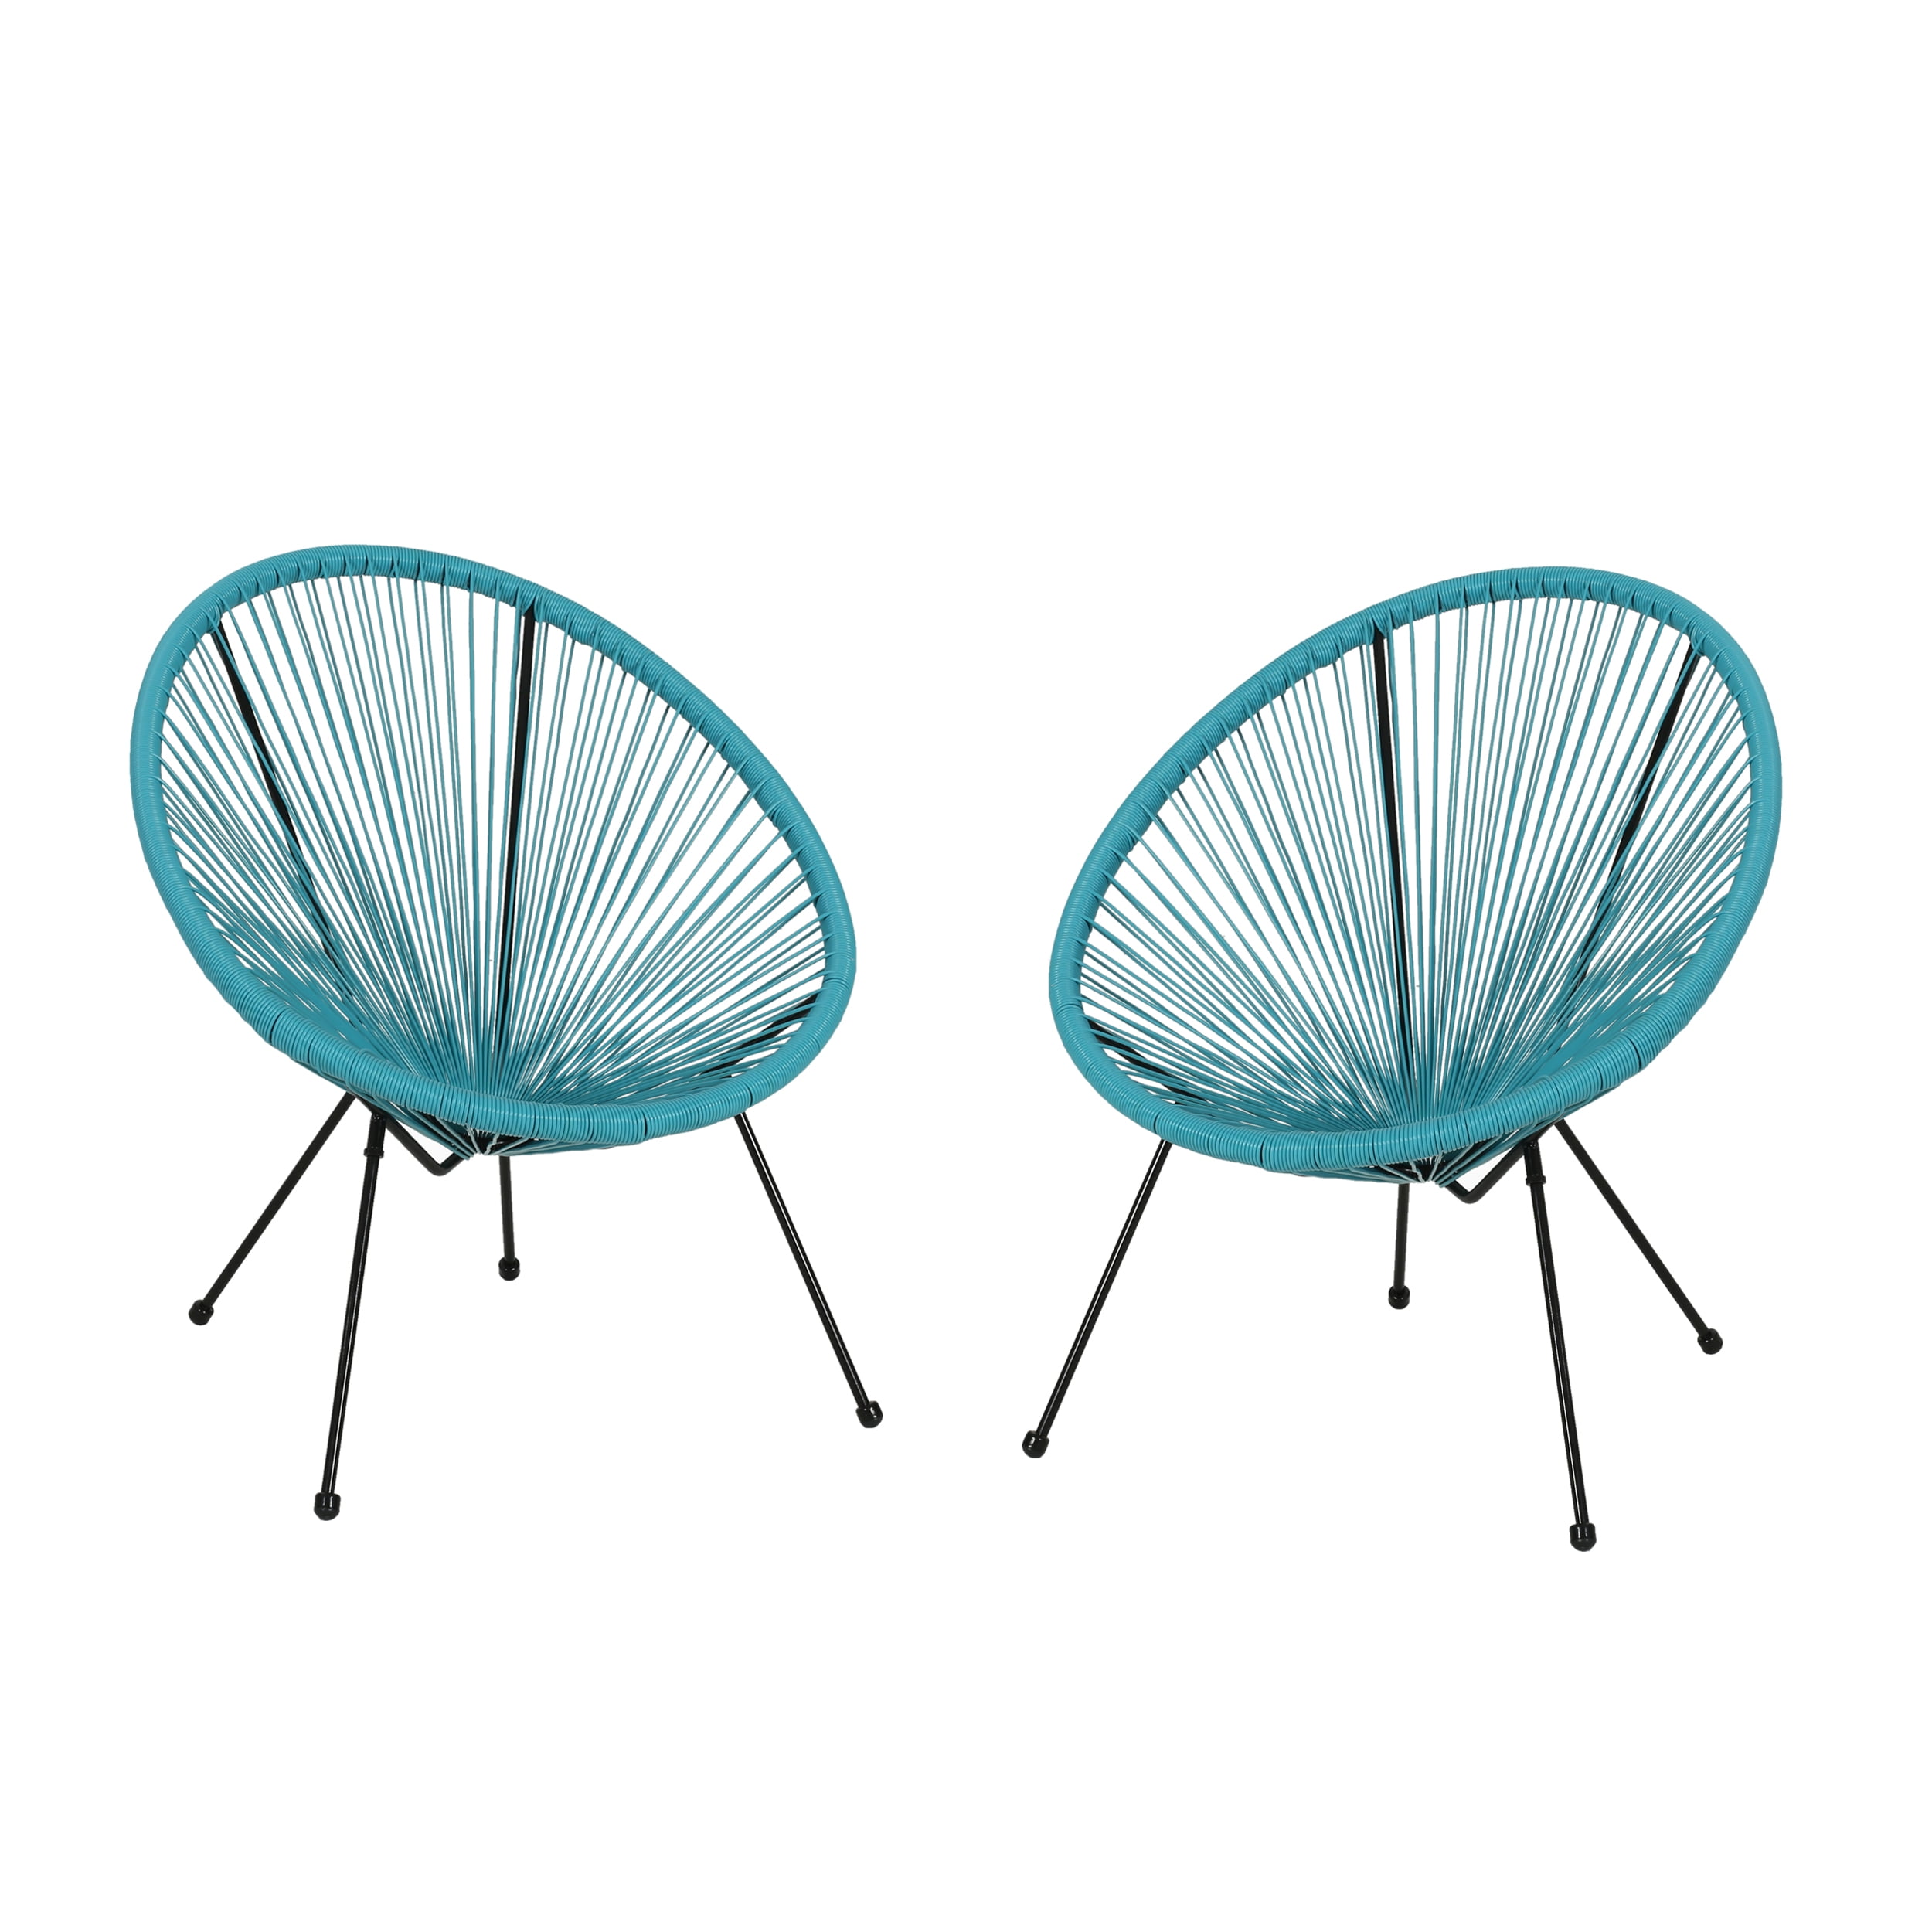 Major Outdoor Hammock Weave Chair with Steel Frame Set of 2 Teal and Black Finish